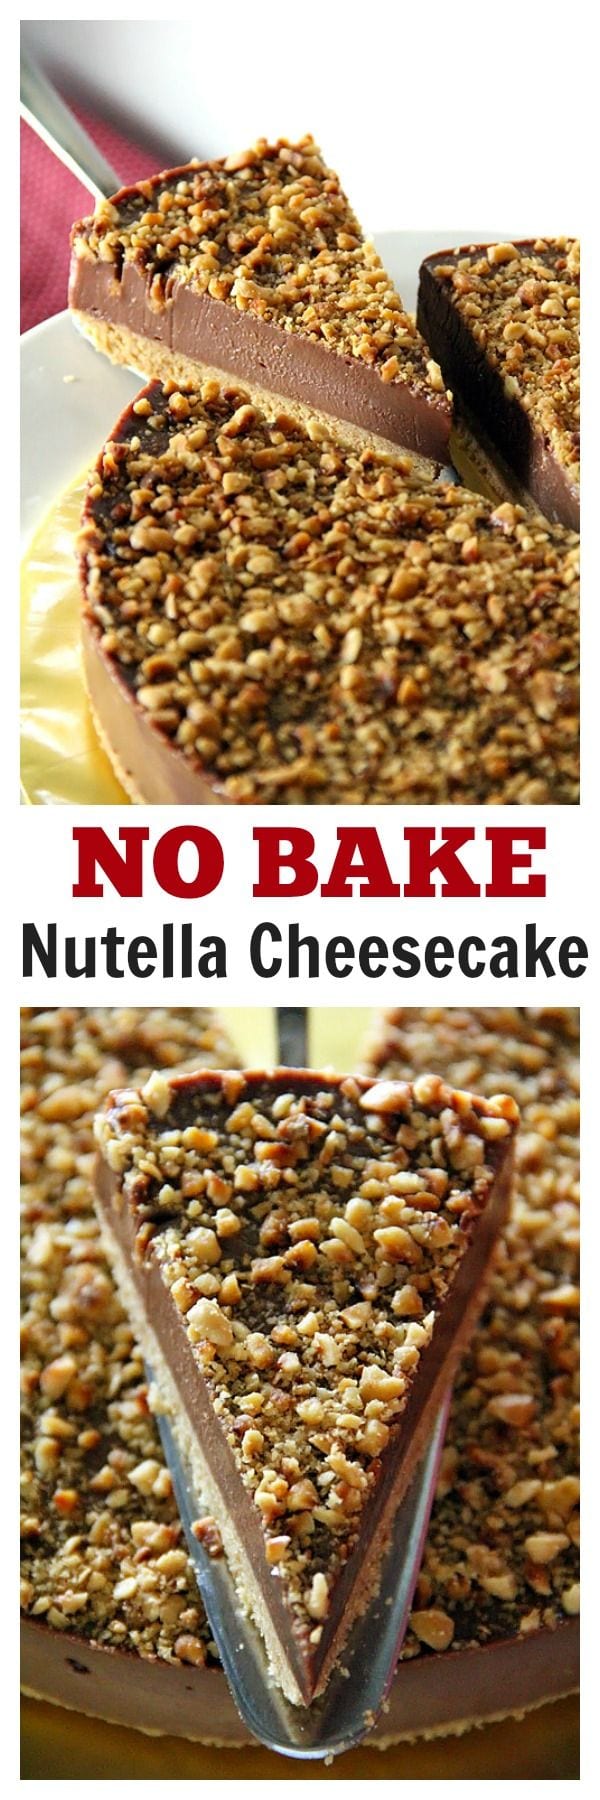 Nutella Cheesecake - easy no-bake cheesecake loaded with Nutella and hazelnut. Creamy, rich, the best Nutella Cheesecake recipe ever, by Nigella Lawson | rasamalaysia.com